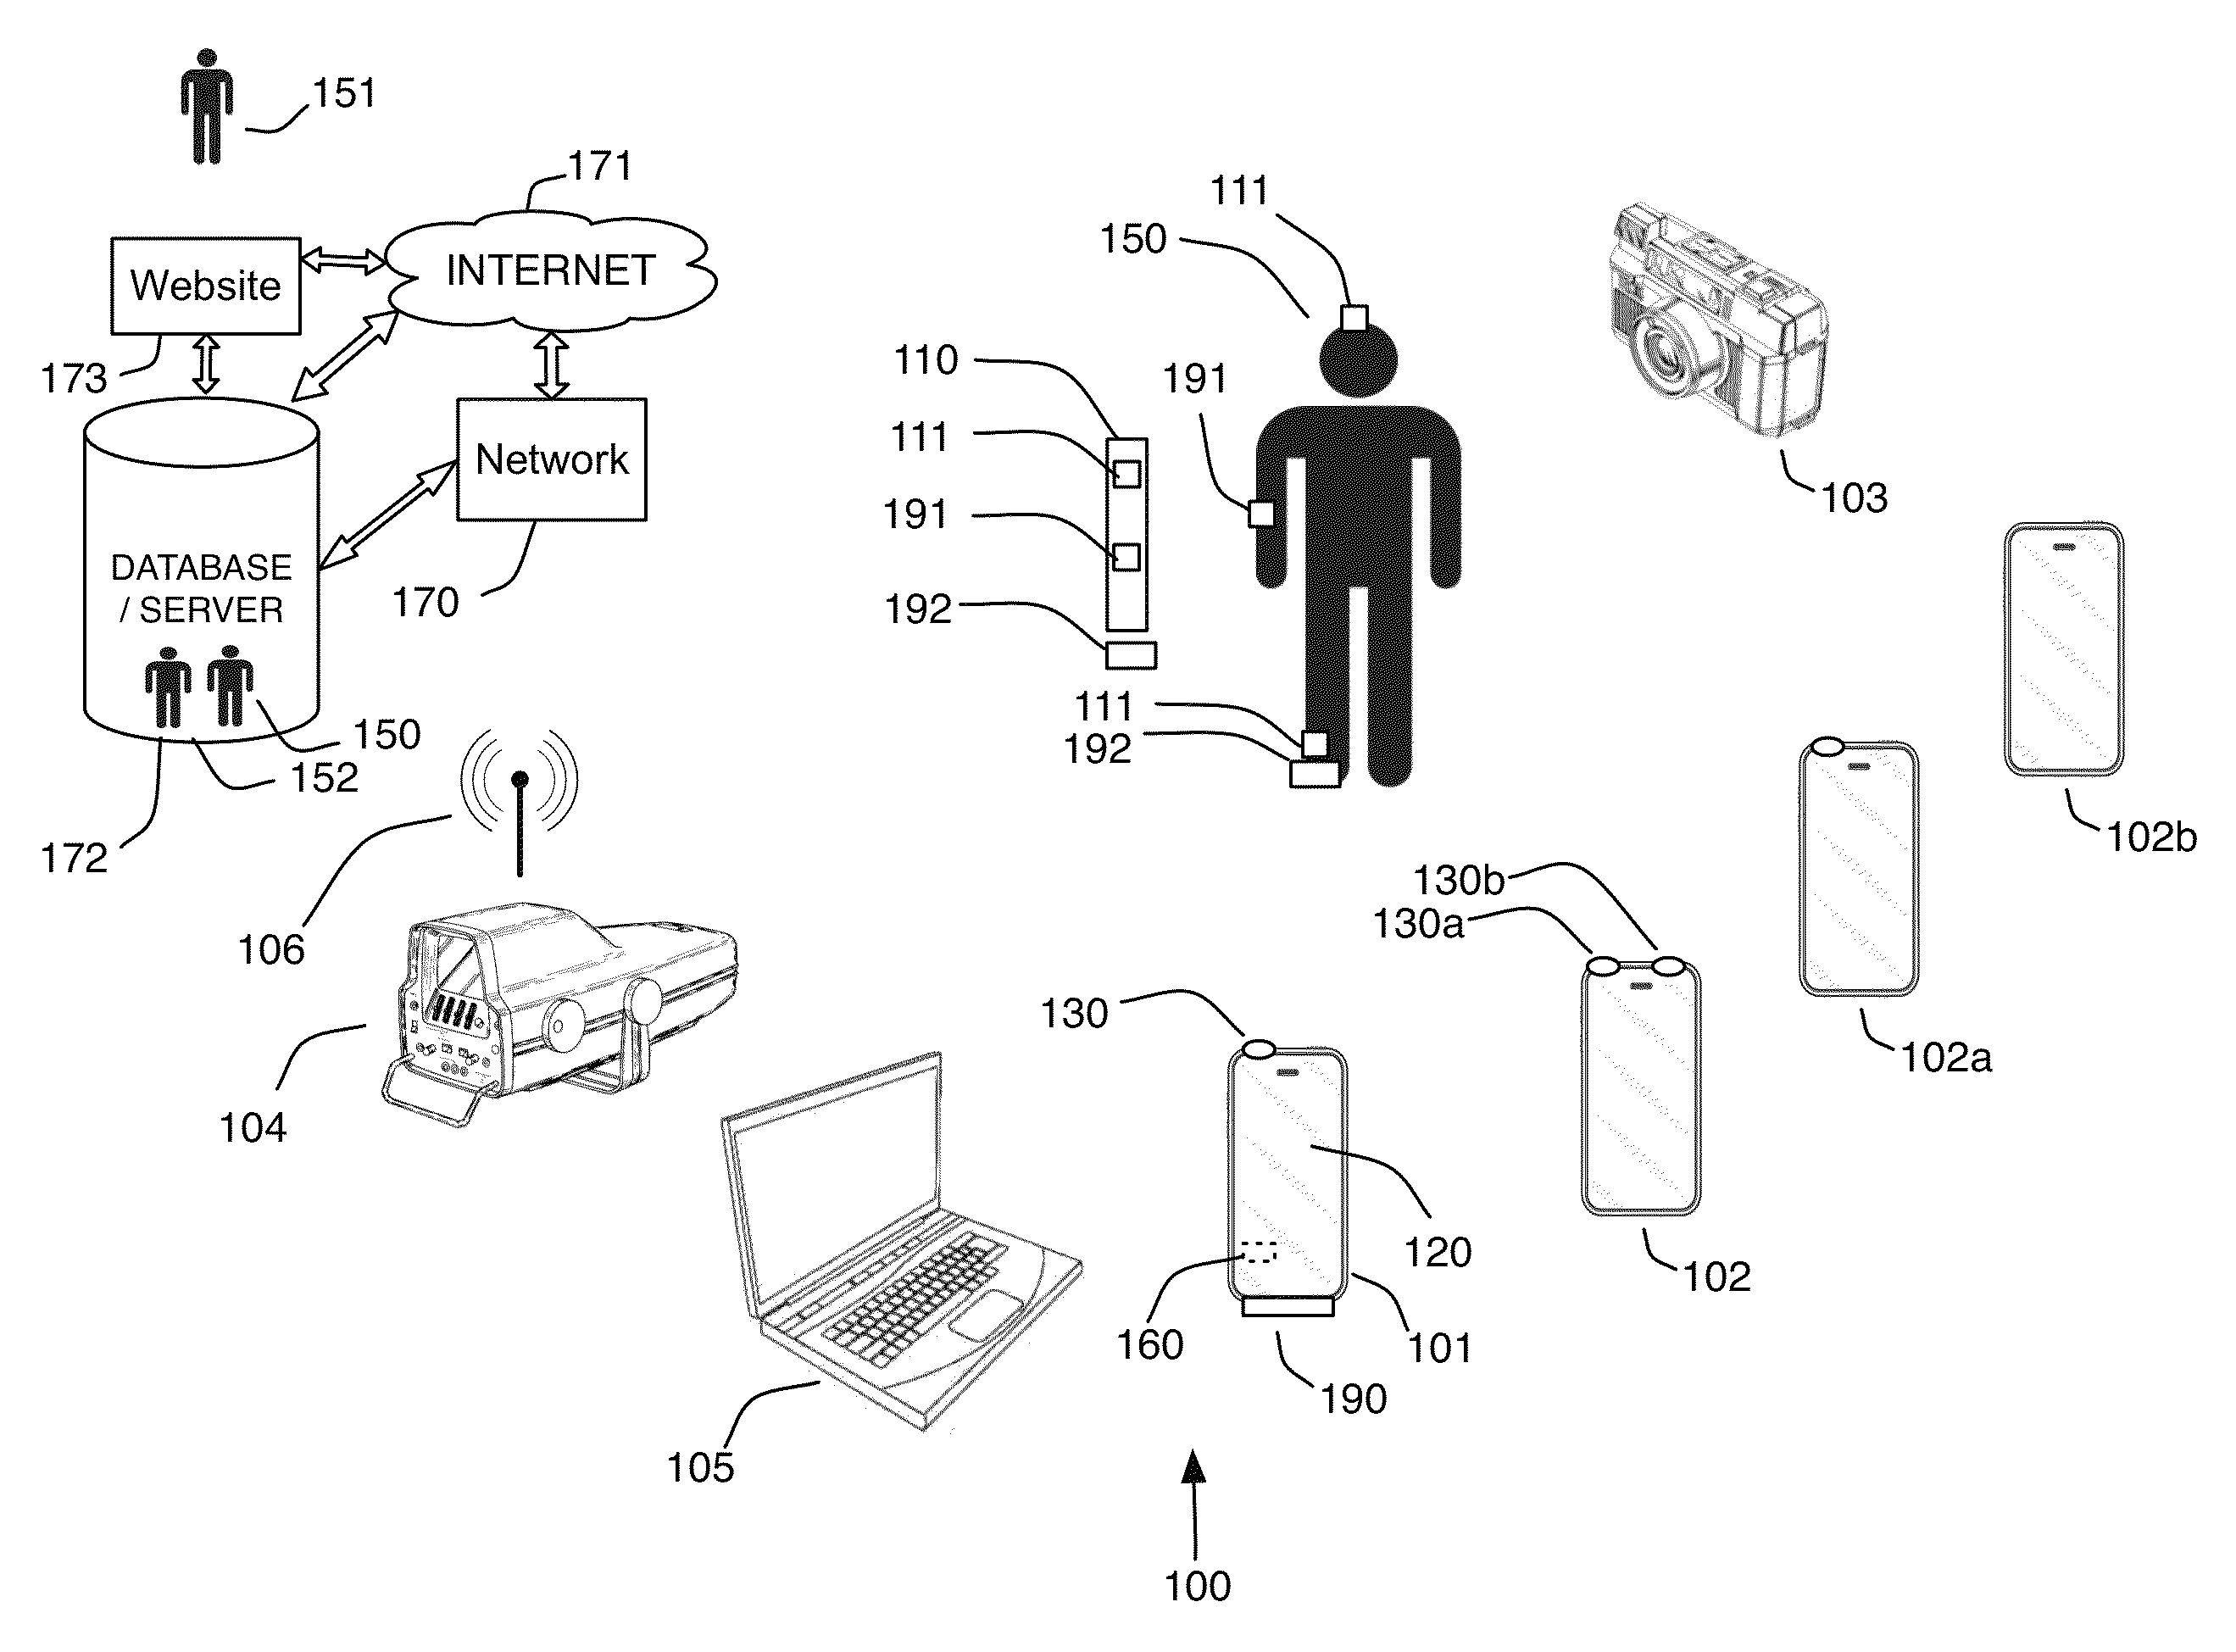 Motion event recognition and video synchronization system and method